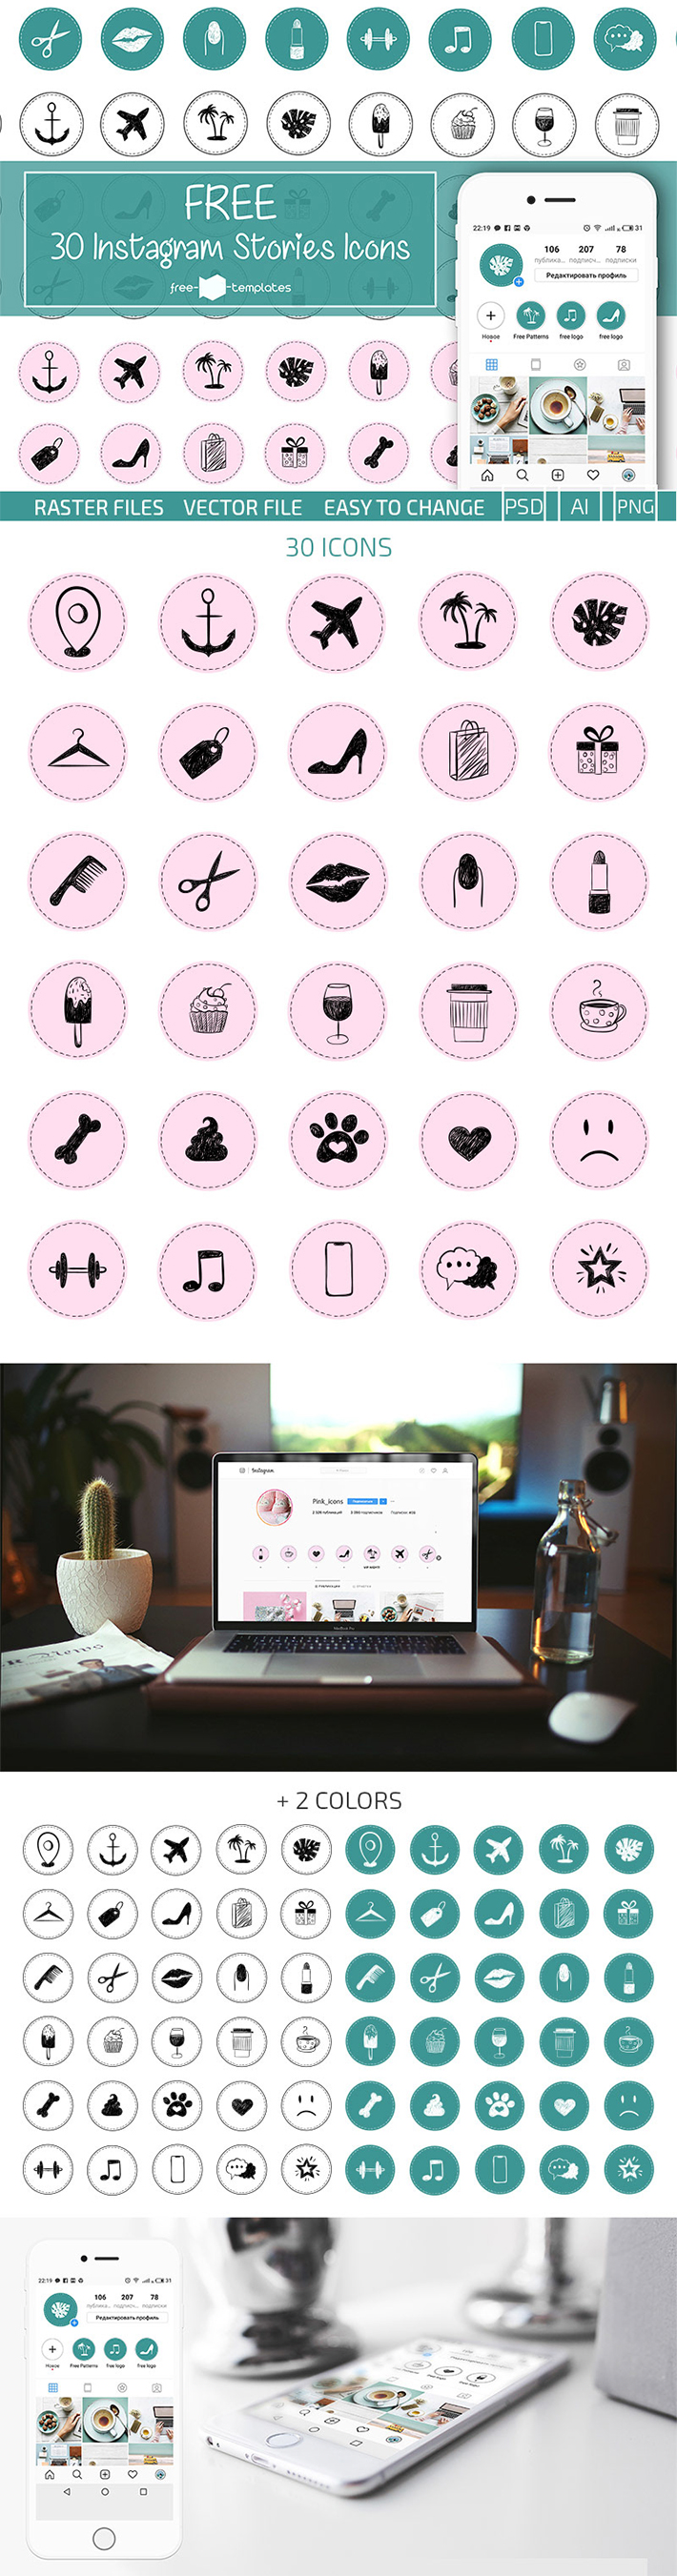 Awesome & Creative 30 Instagram Stories Icons Free Download